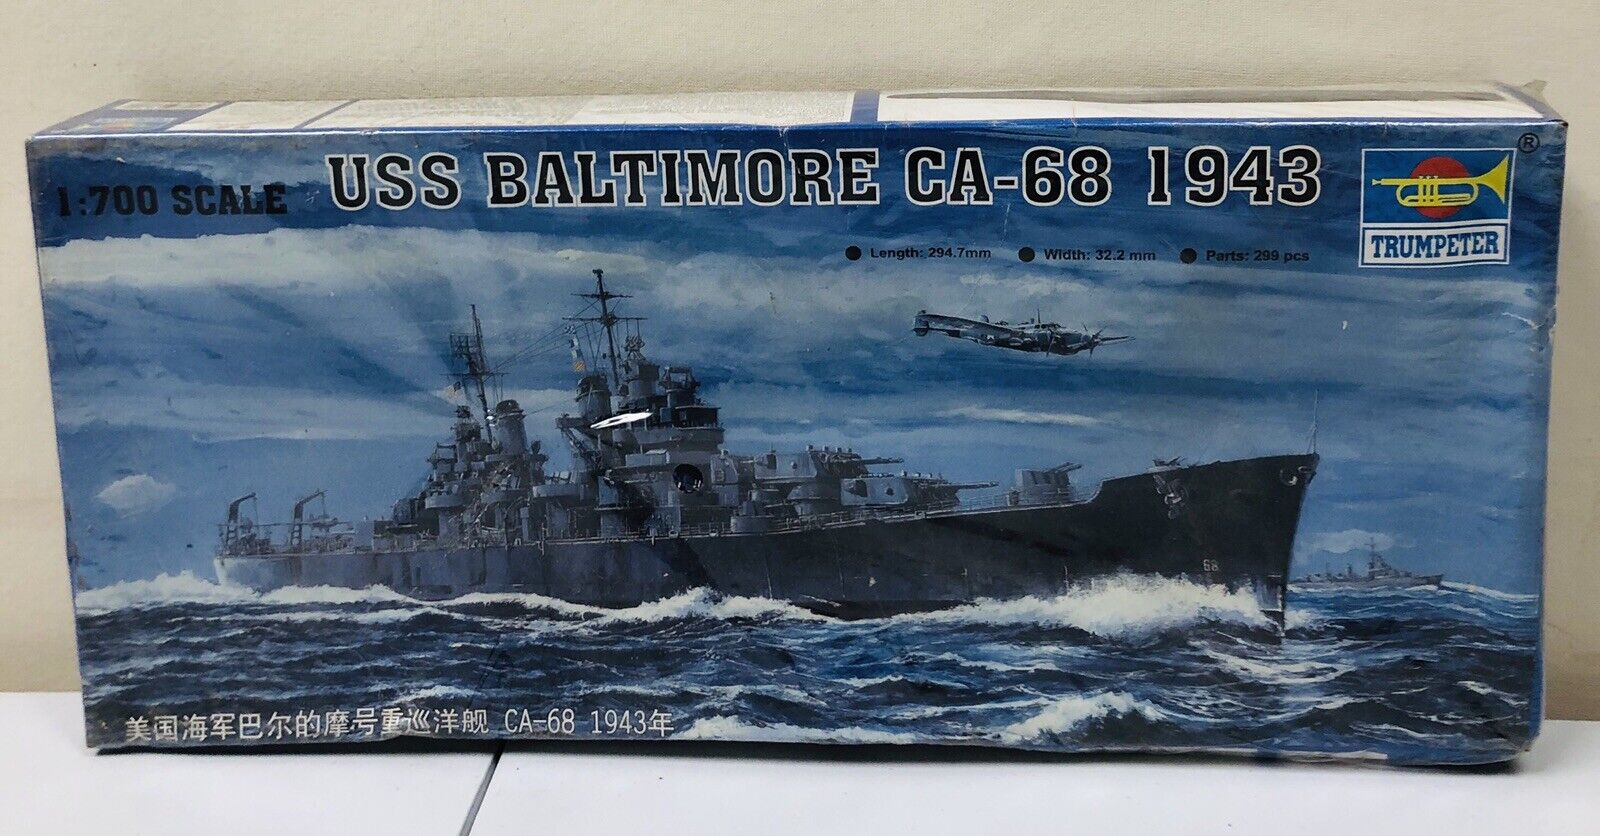 USS Baltimore CA-68 1943 Trumpeter Model Kit 1:700 Scale NEW Sealed #05724